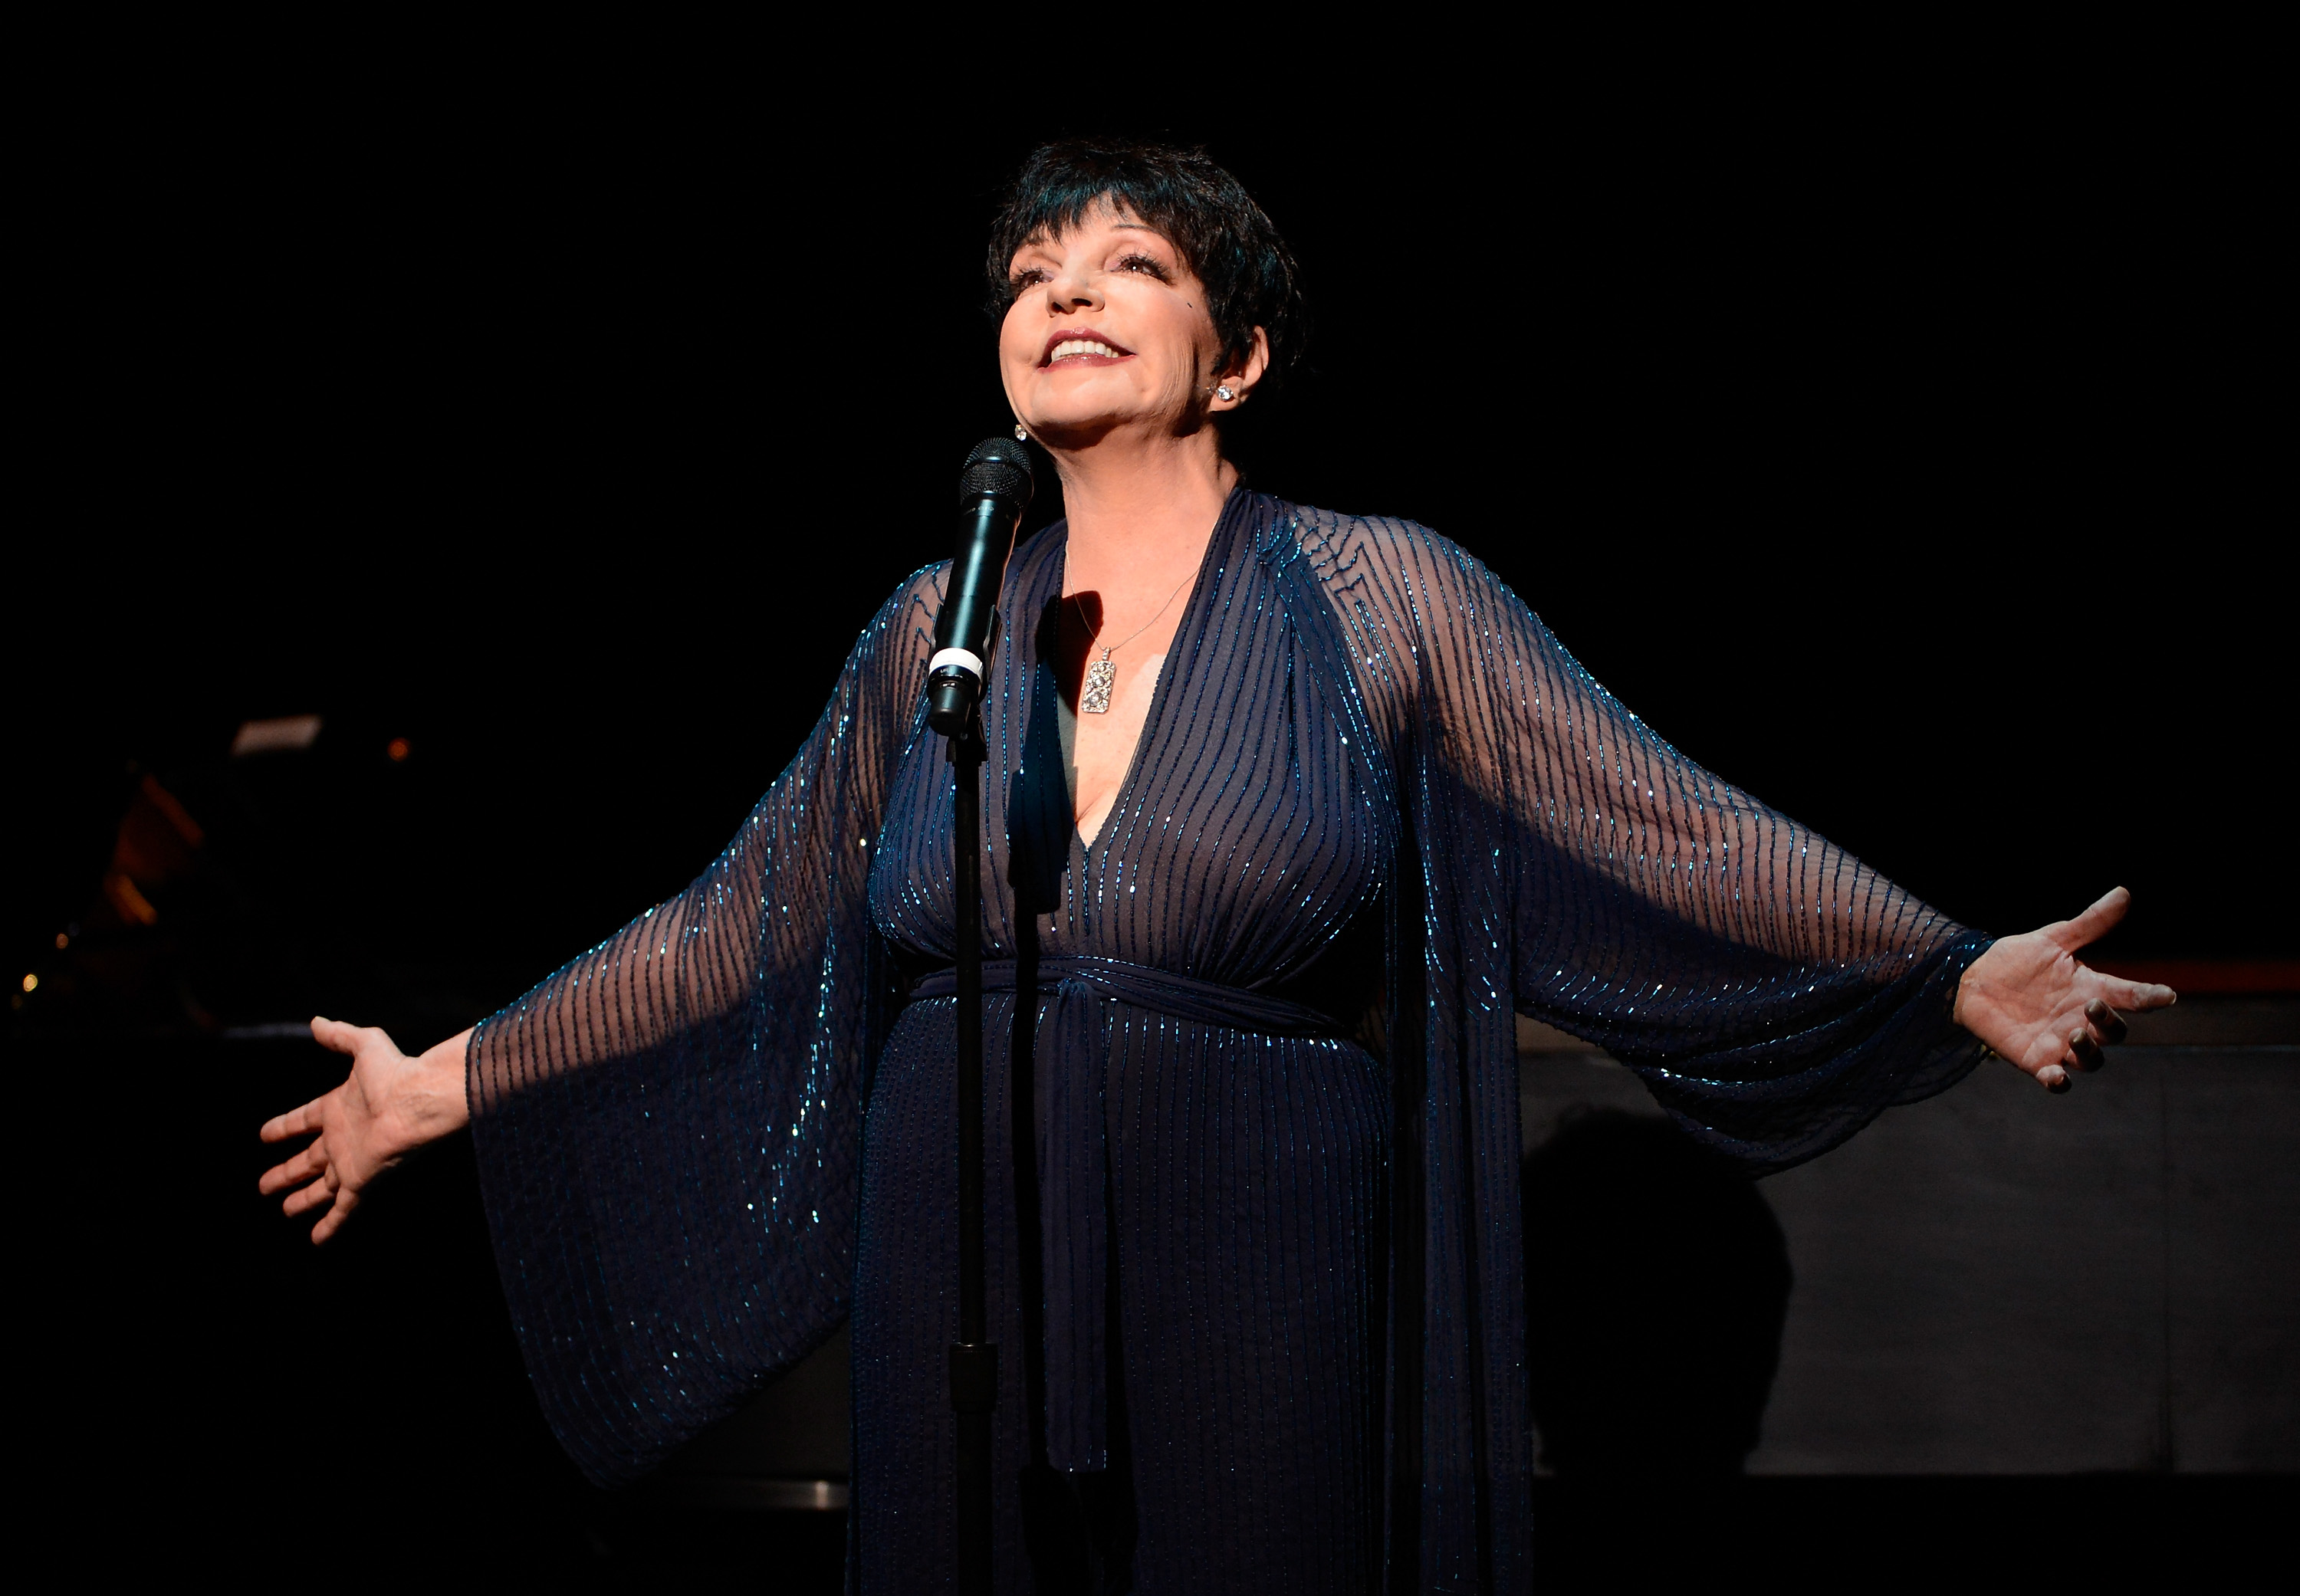 Liza Minnelli performs "If You Really Knew Me" from They're Playing My Song on stage at the memorial of Marvin Hamlisch at Peter Jay Sharp Theater on September 18, 2012, in New York City. | Source: Getty Images